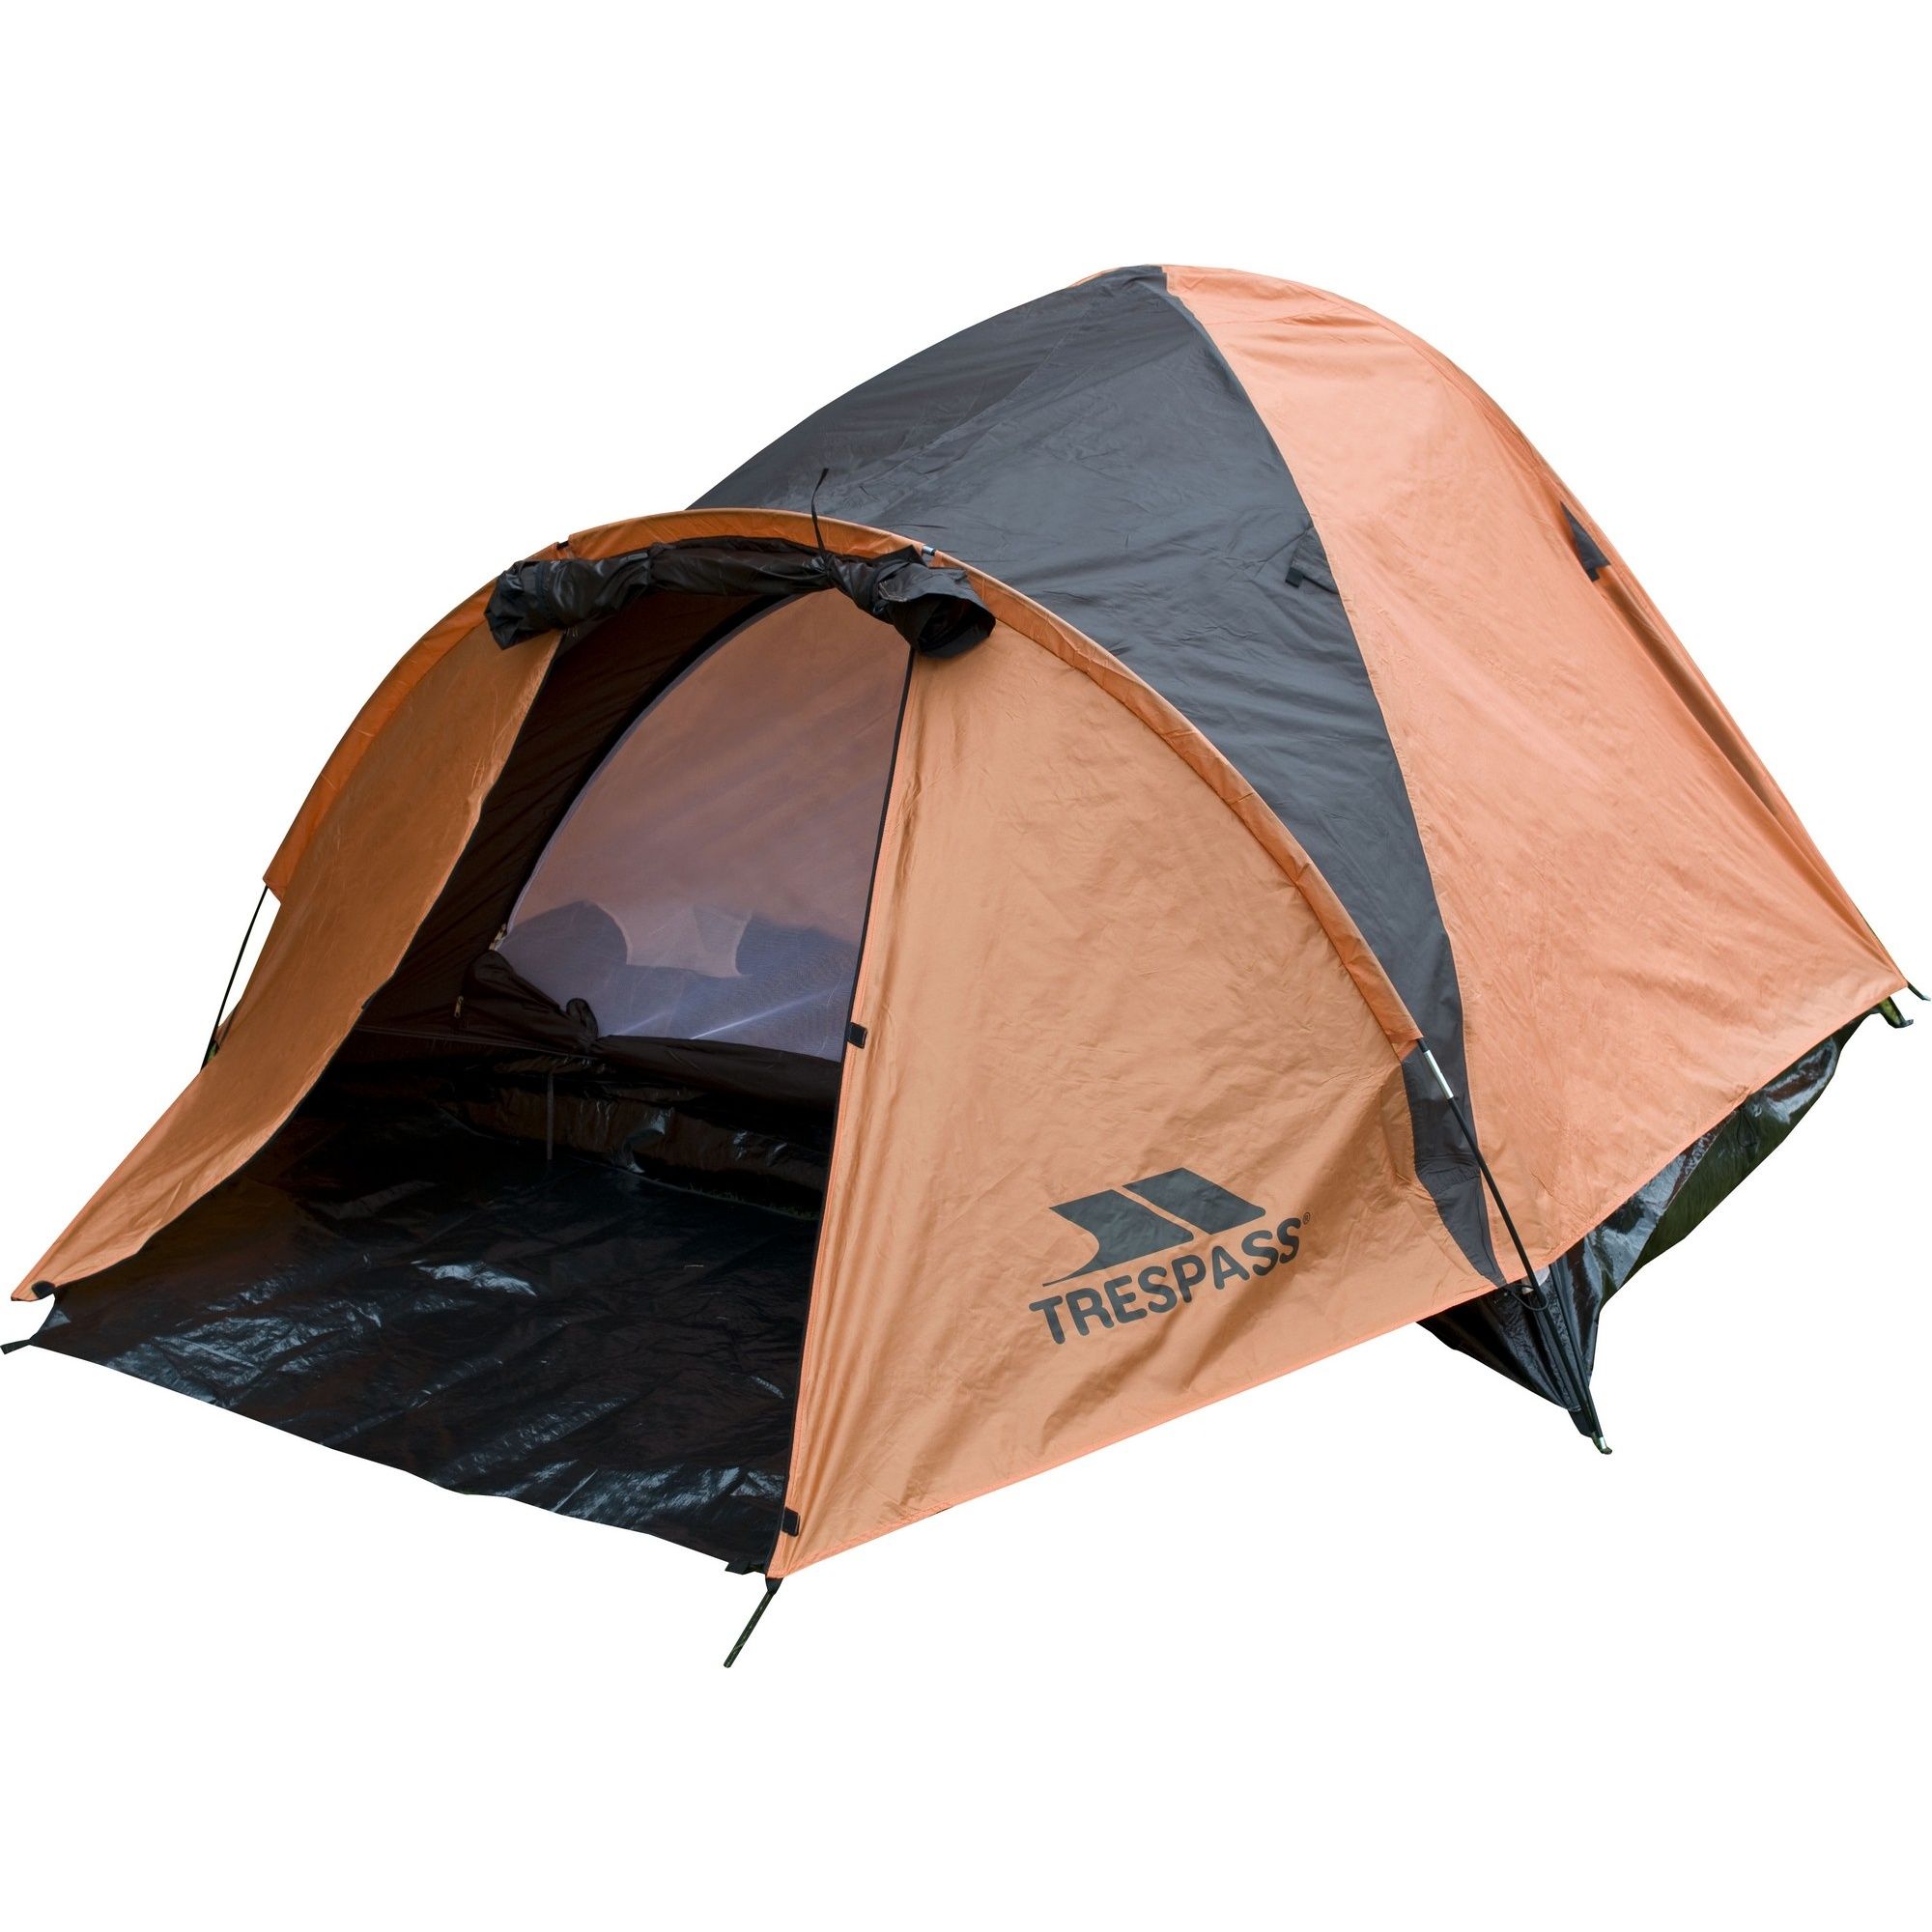 The Trespass Ghabhar 4 man dome tent is perfect for festival camping; cheap, cheerful and waterproof! Double skin 4 person tent, including groundsheet and midgeproof mesh. Tent dimensions: 285 x 240 x 130cm. Weight 4.3kg. Packed size 56cm.